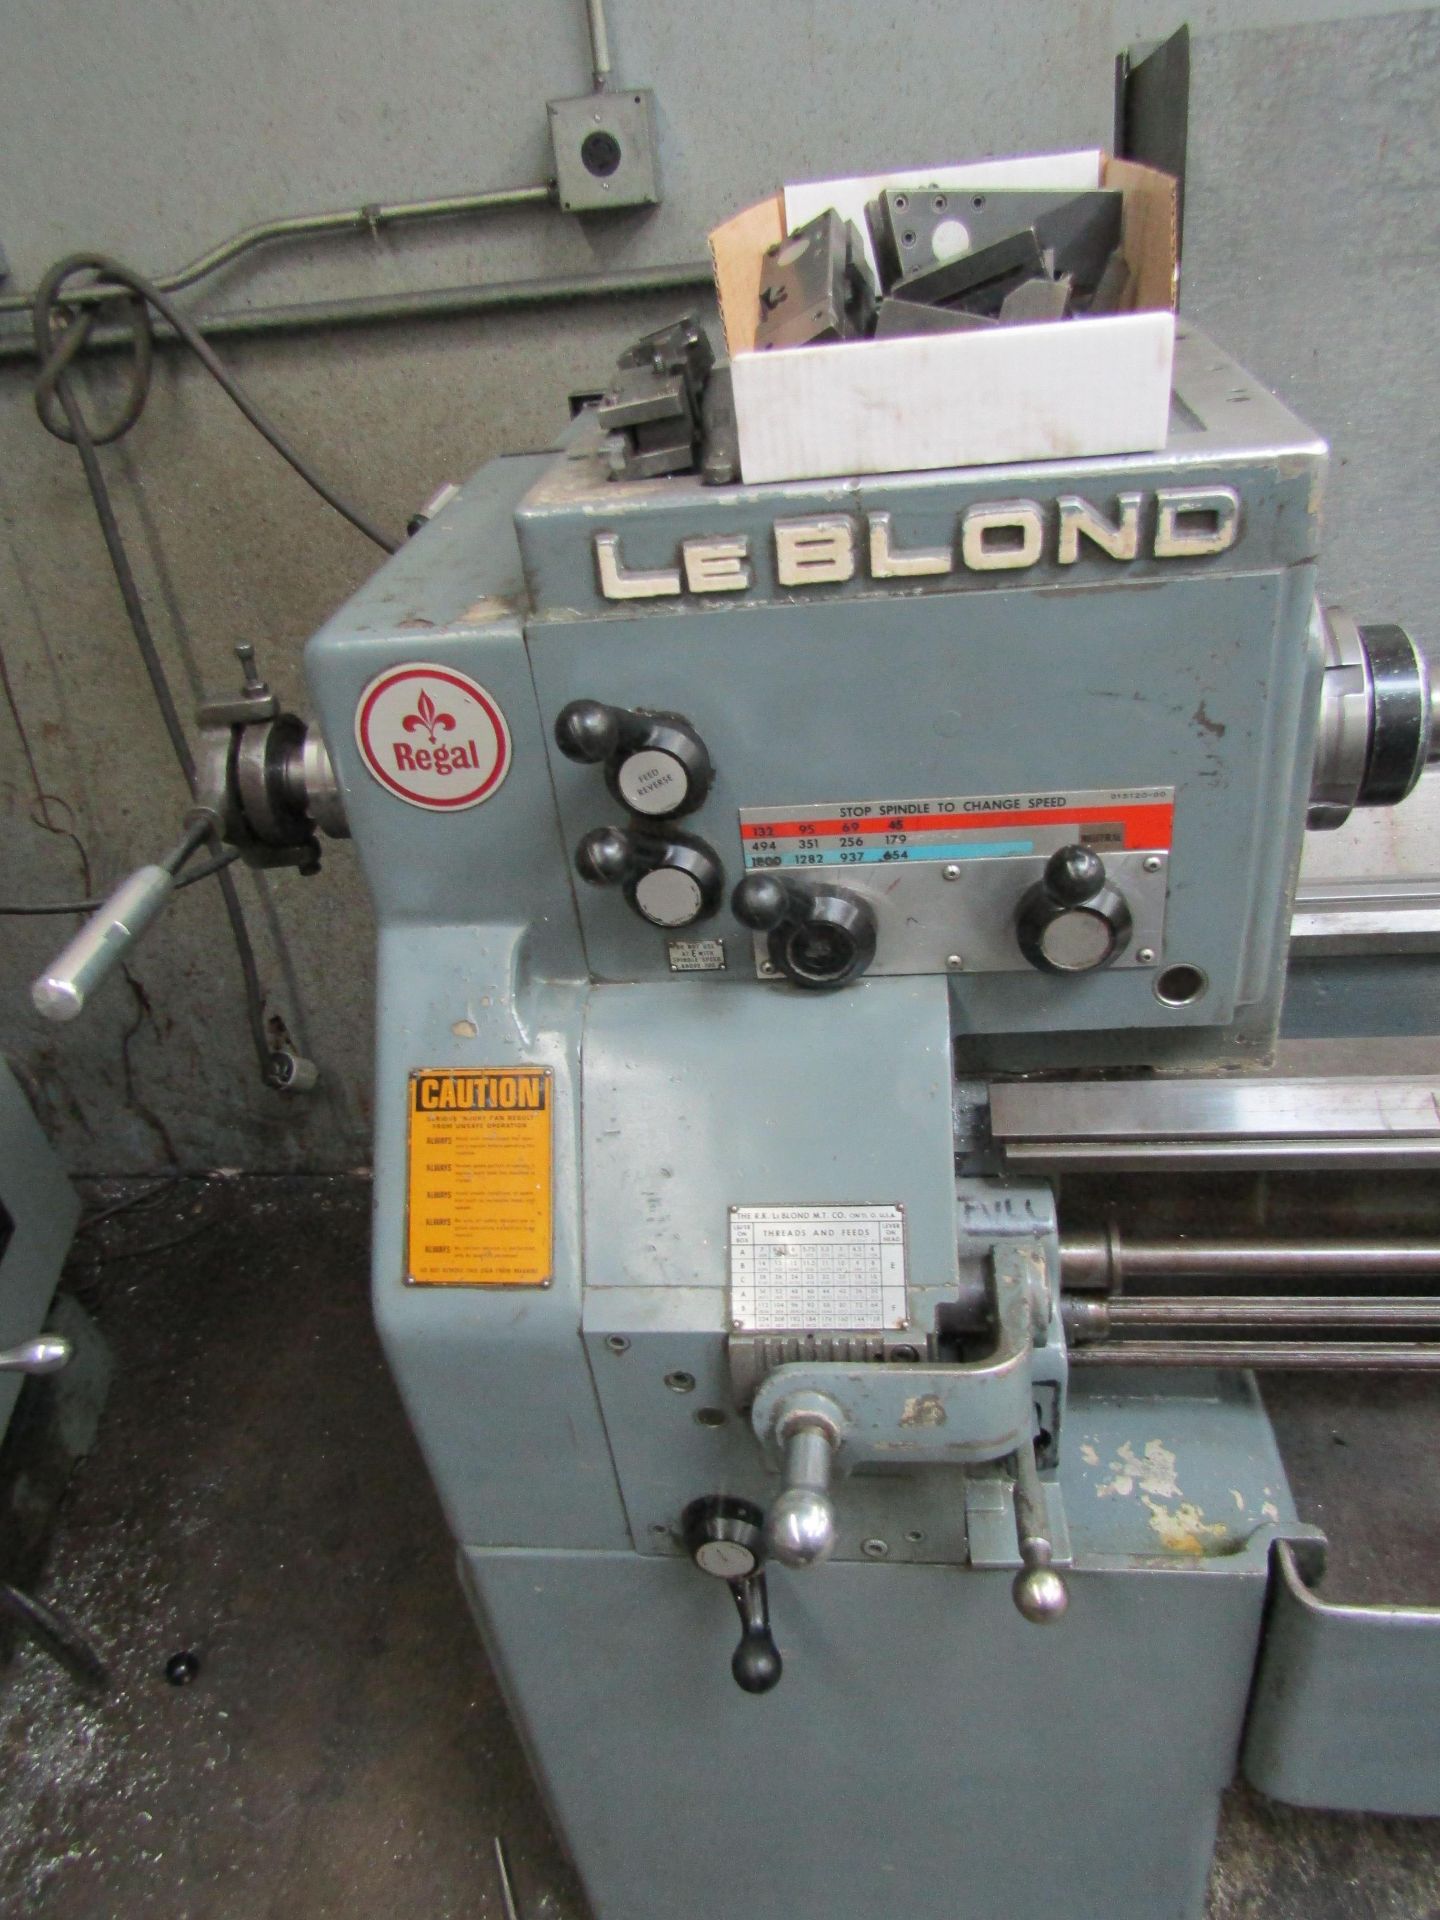 1971 LEBLOND REGAL ENGINE LATHE, 15" SWING, SERIAL 8C-3566. WITH ASSORTED TOOL HOLDERS AND - Image 2 of 11